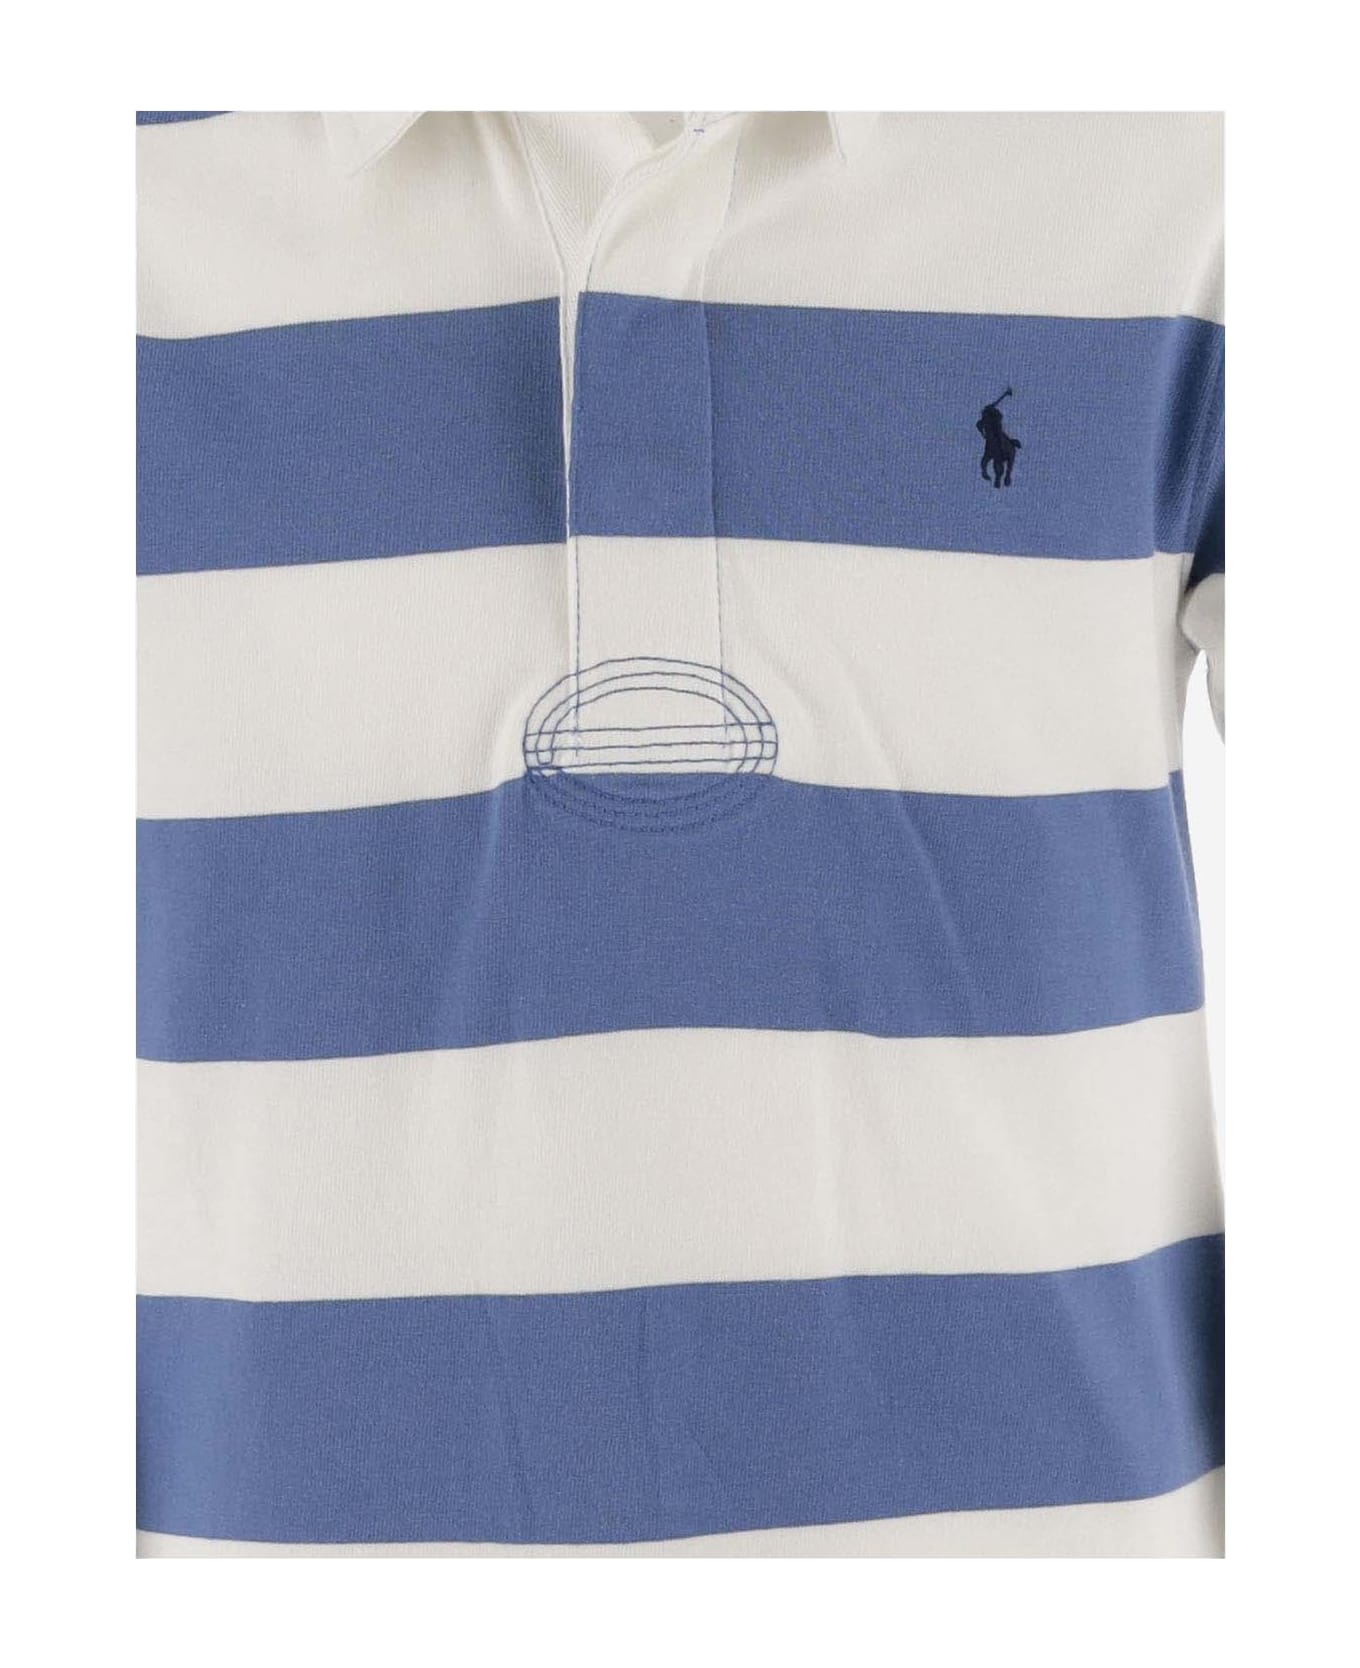 Polo Ralph Lauren Cotton Polo Shirt With Logo And Striped Pattern - Red